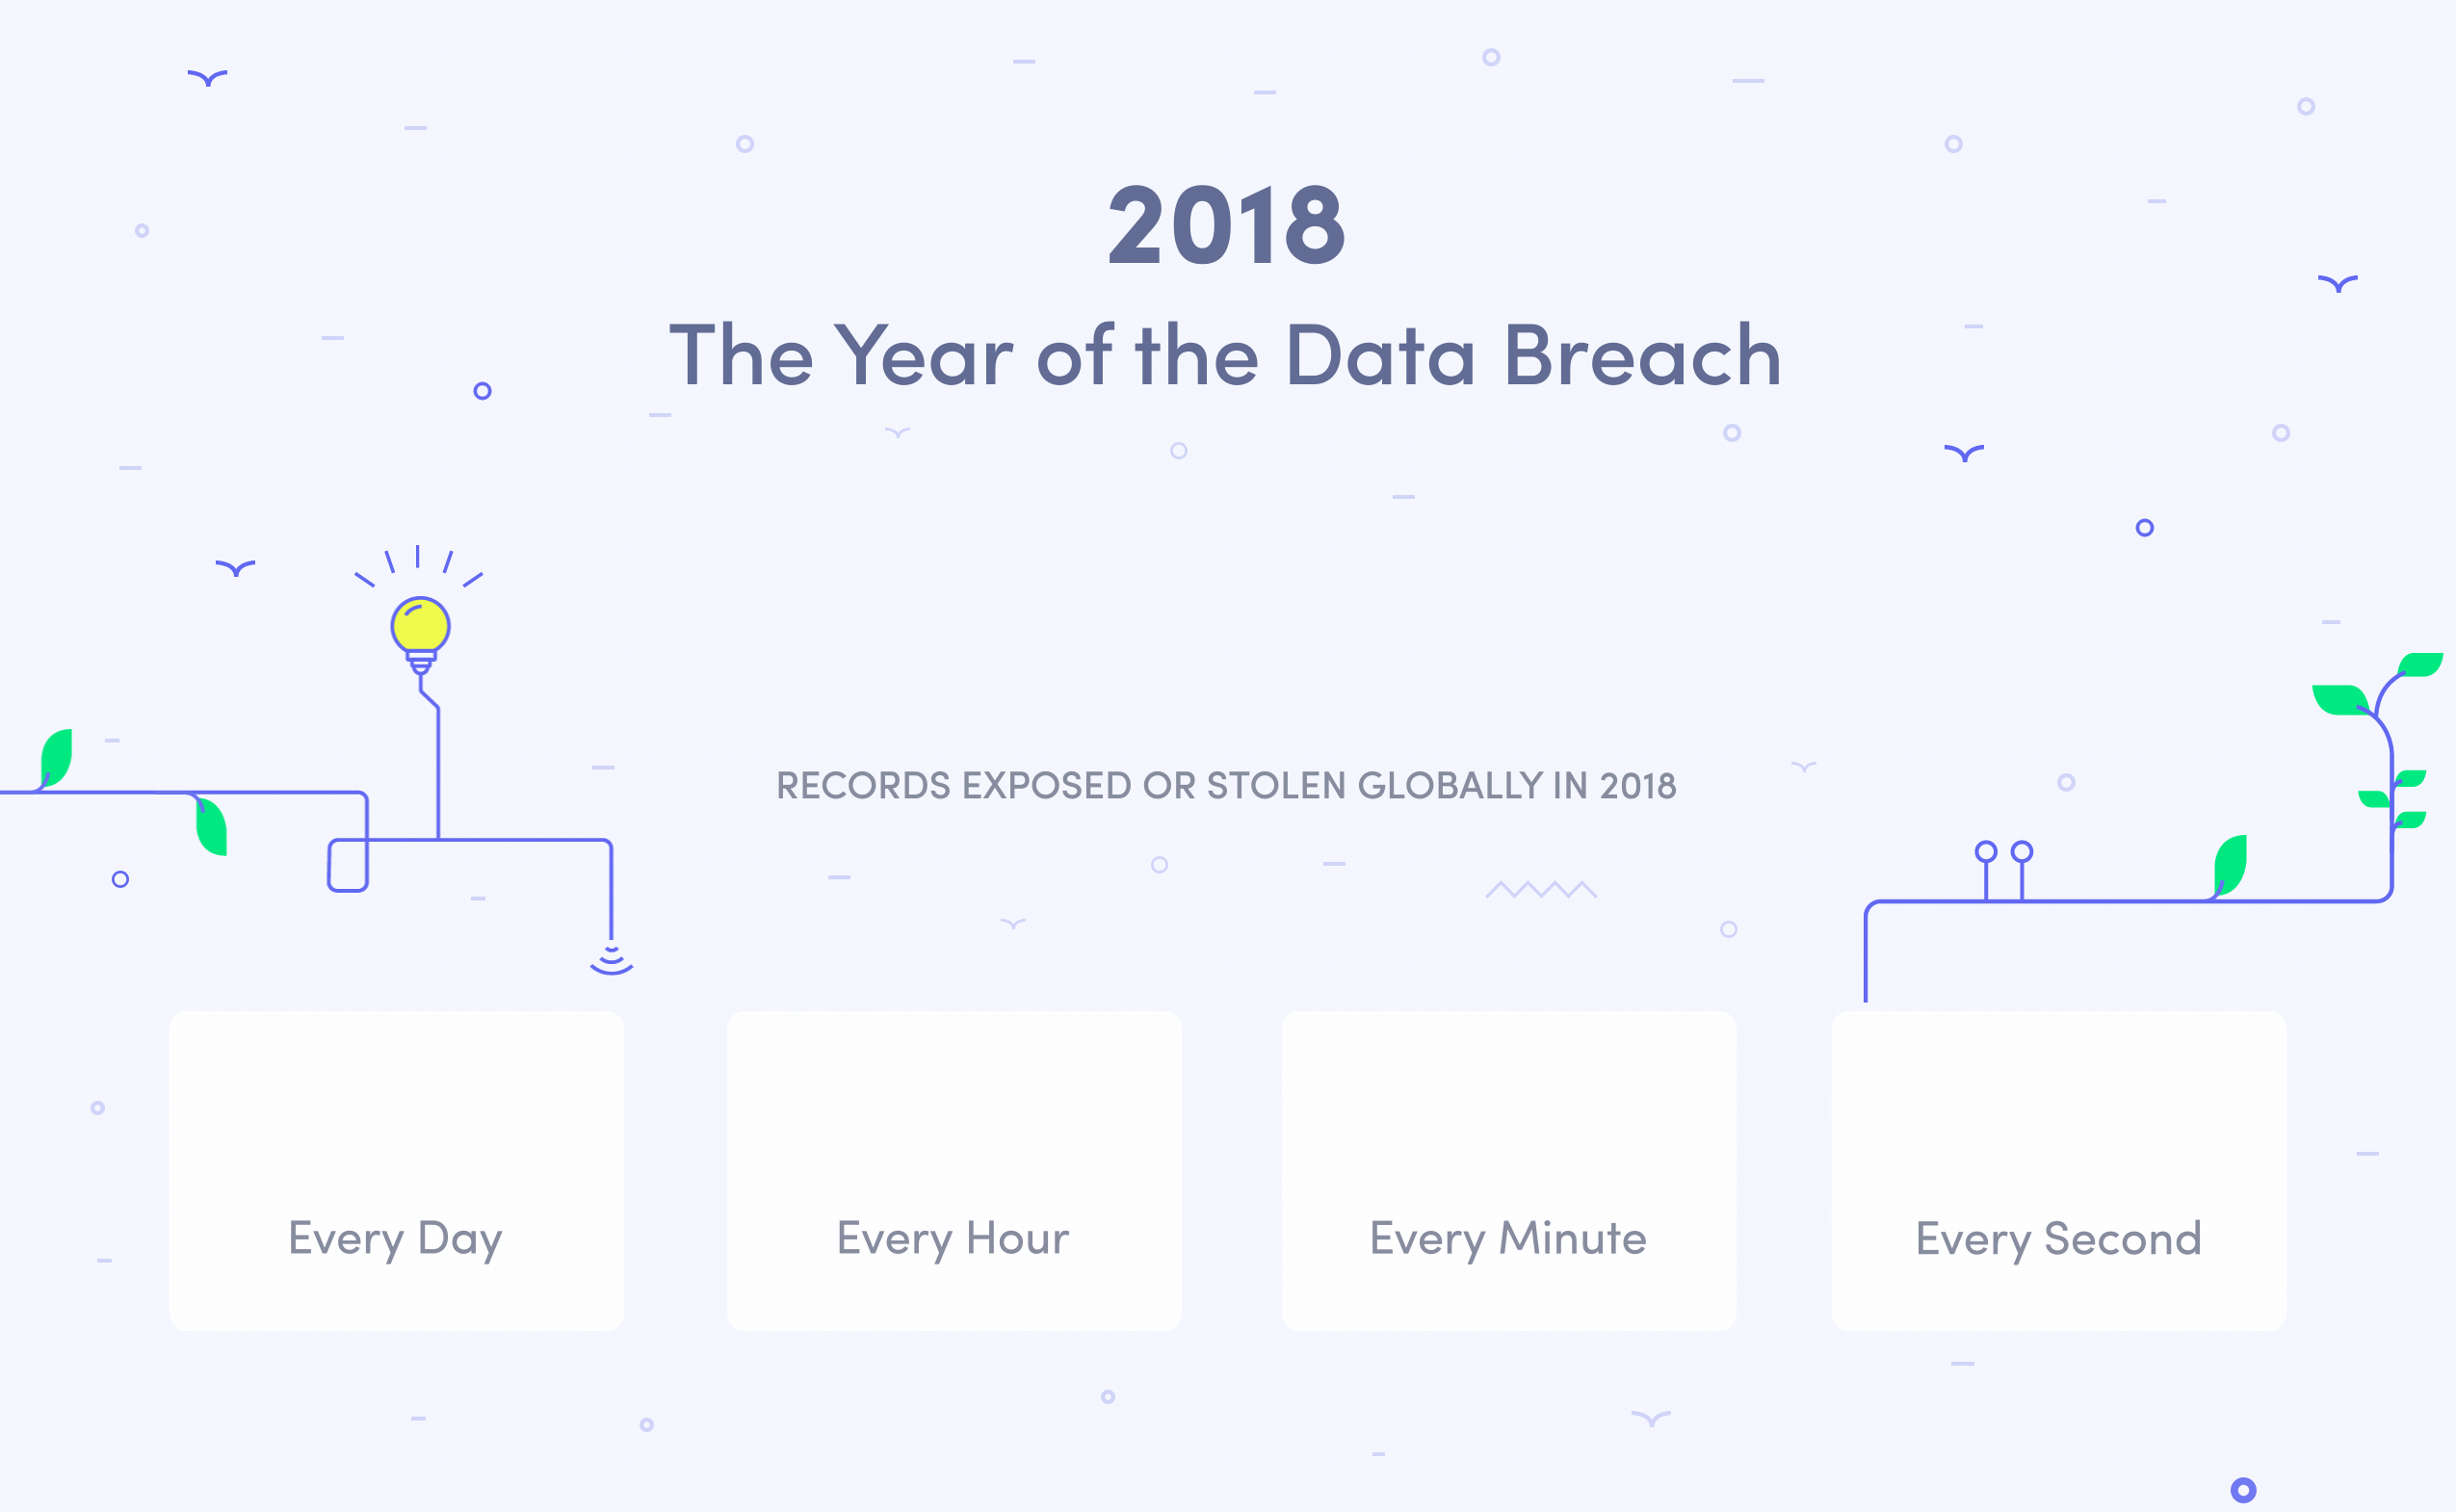 2018: The Year of the Data Breach